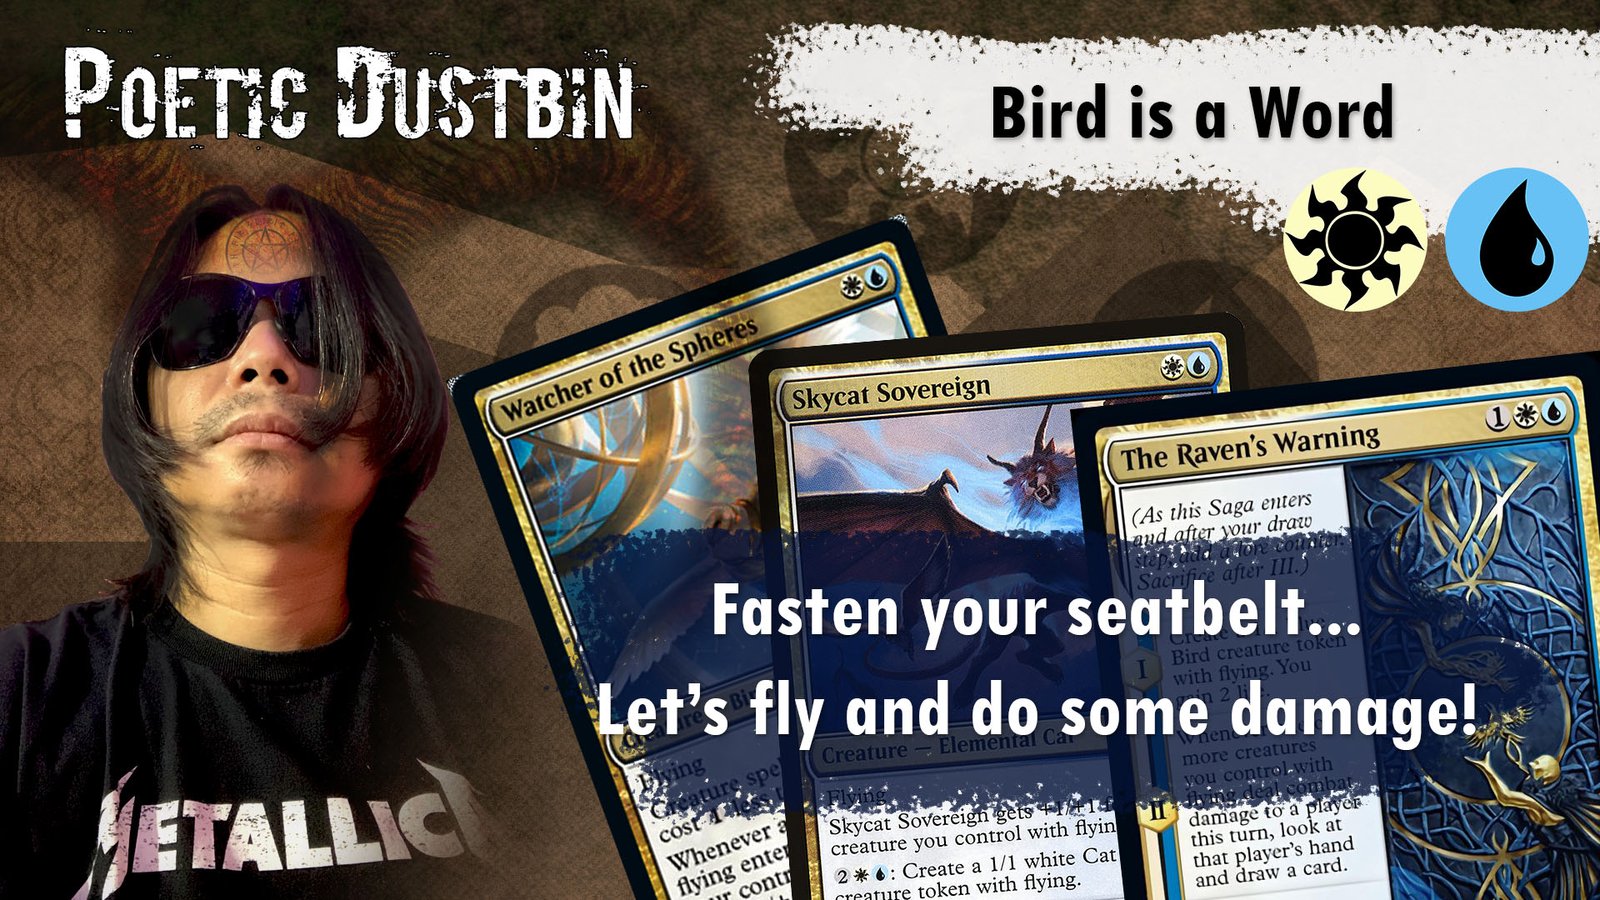 MTG Arena - Kaldheim Azorious Standard Bird Deck with Raven's Warning and Dream Trawler - Poetic Dustbin